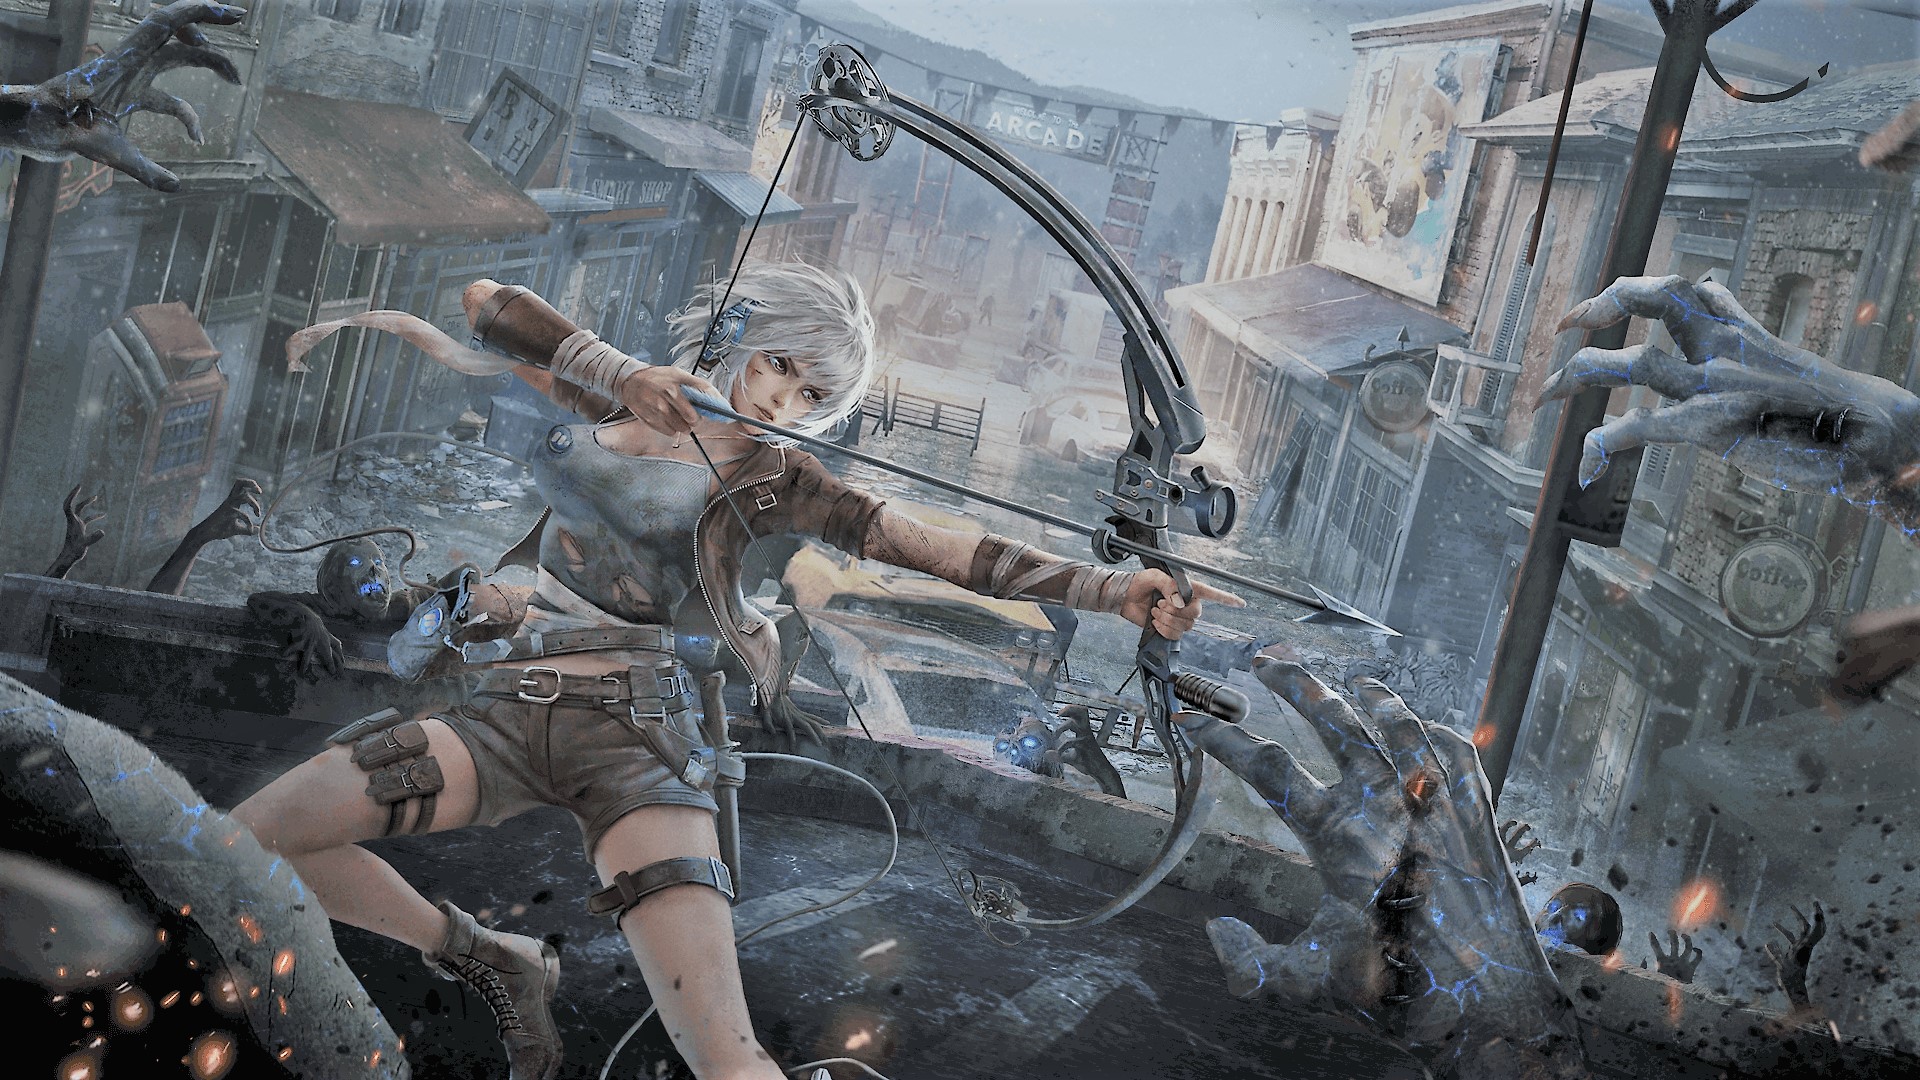 General 1920x1080 archery Game Gear Dong fang Project artwork bow and arrow torn clothes creature short shorts headphones boots knife silver hair women